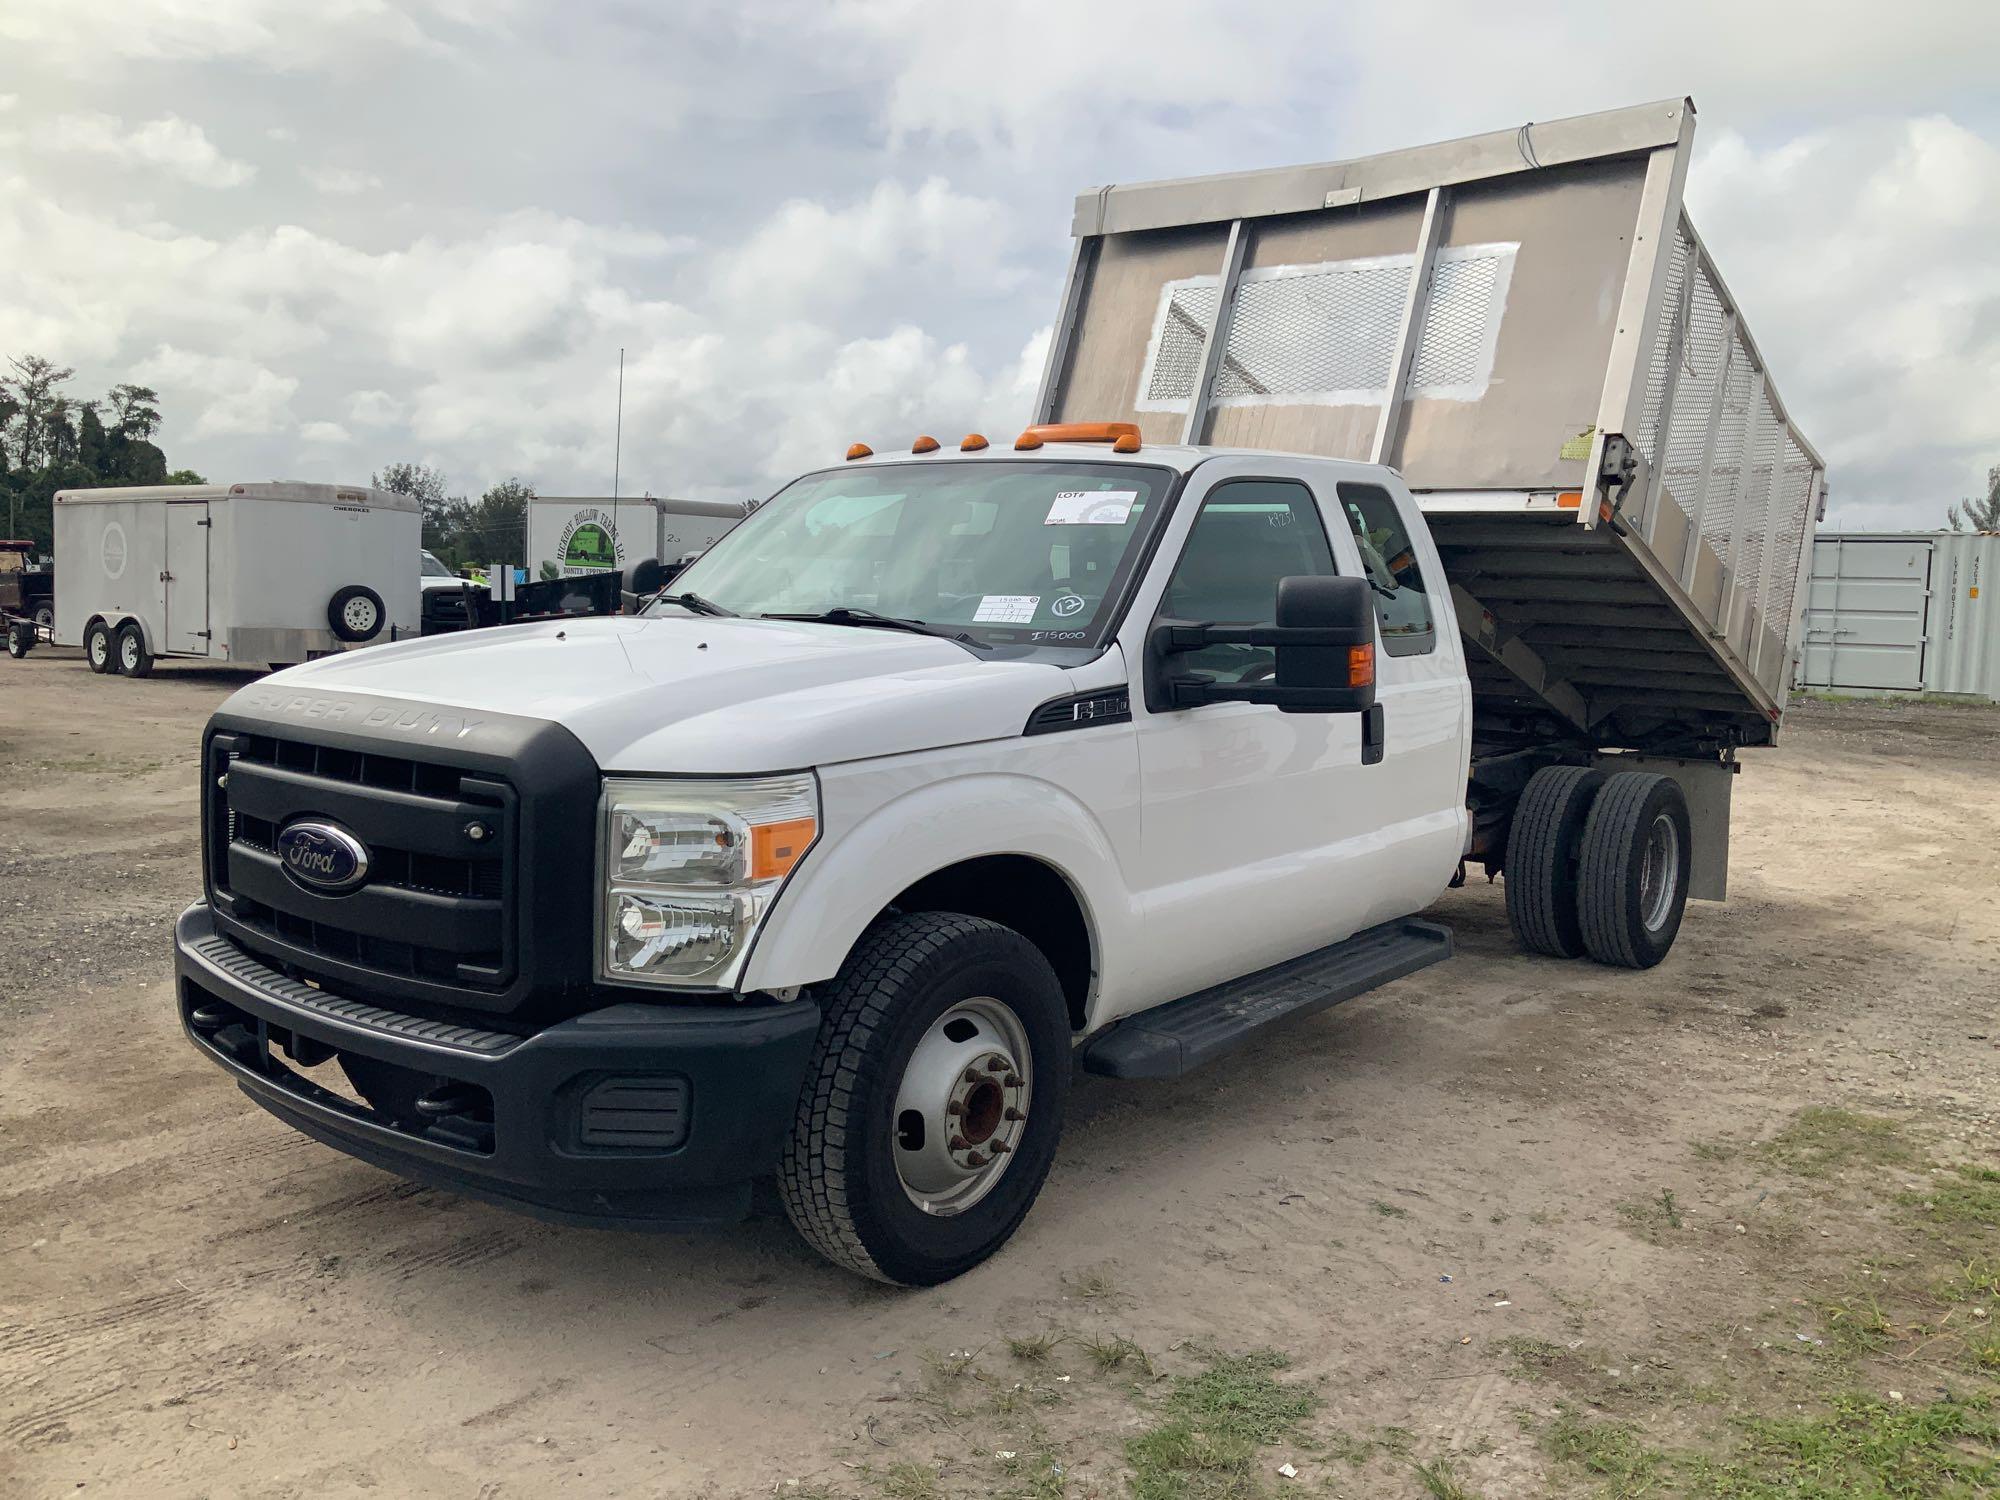 2012 Ford F-350 Extended Cab Landscape Dump Truck